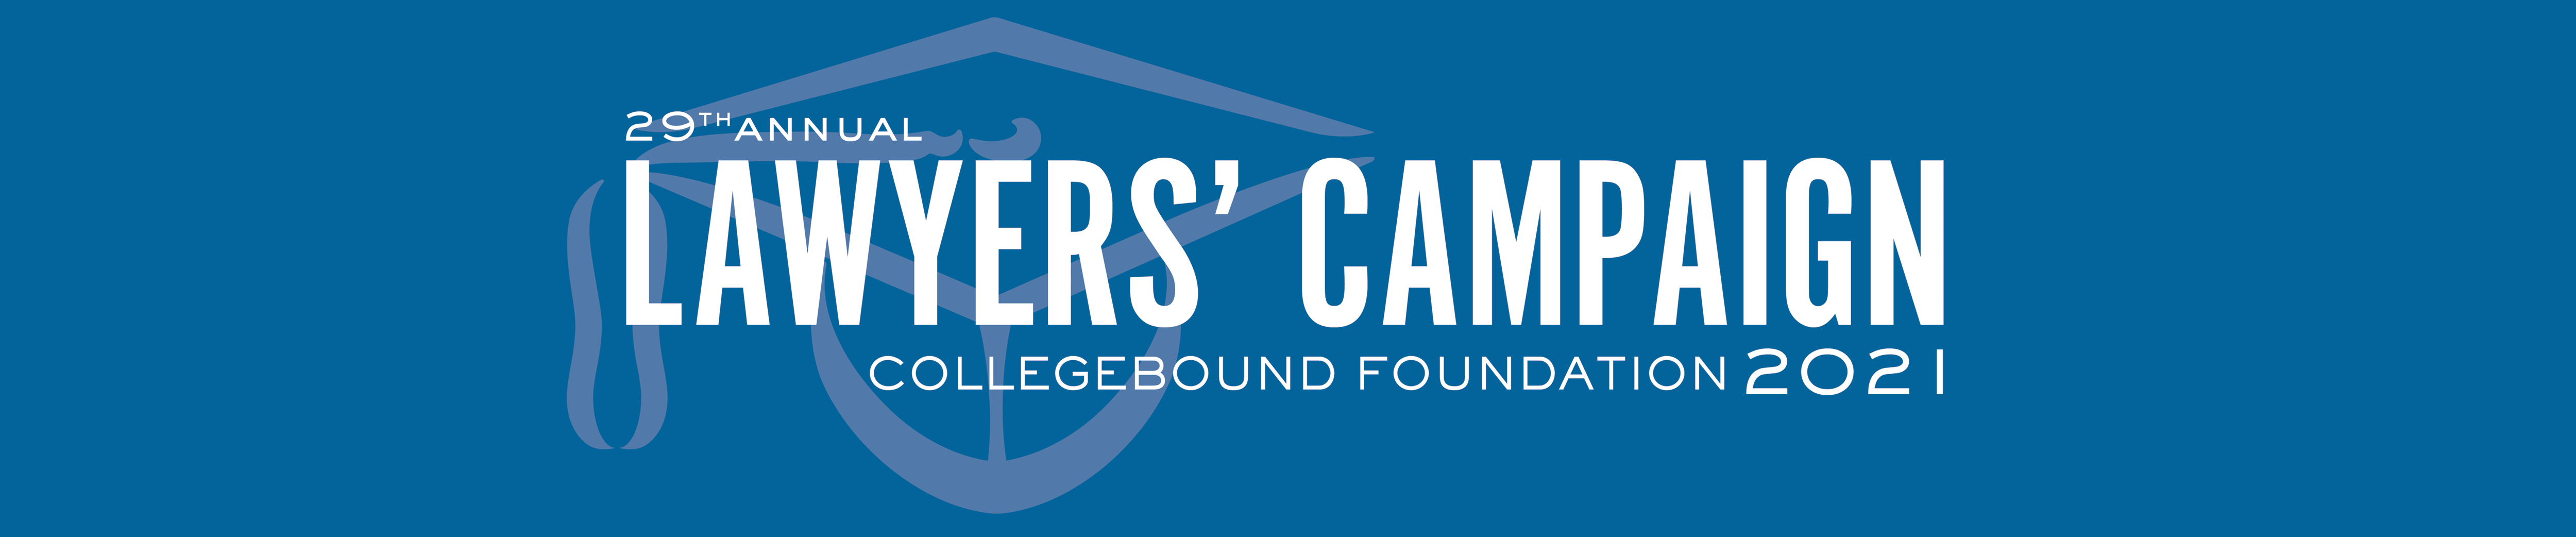 29th Annual Lawyers' Campaign for CollegeBound